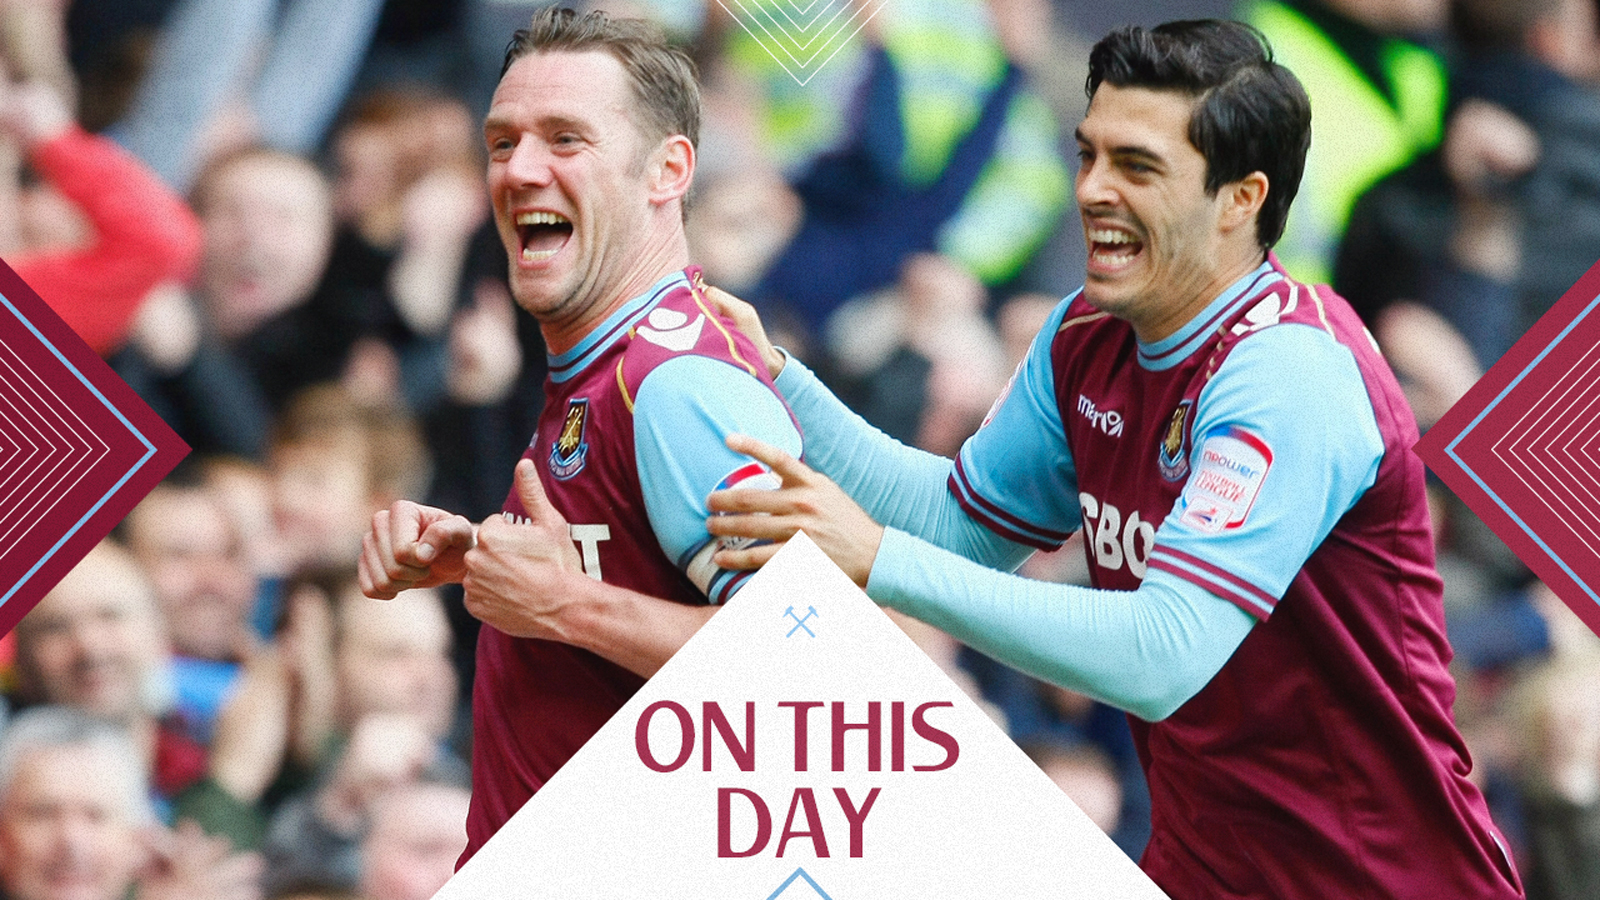 Kevin Nolan celebrates his goal against Cardiff City in May 2012